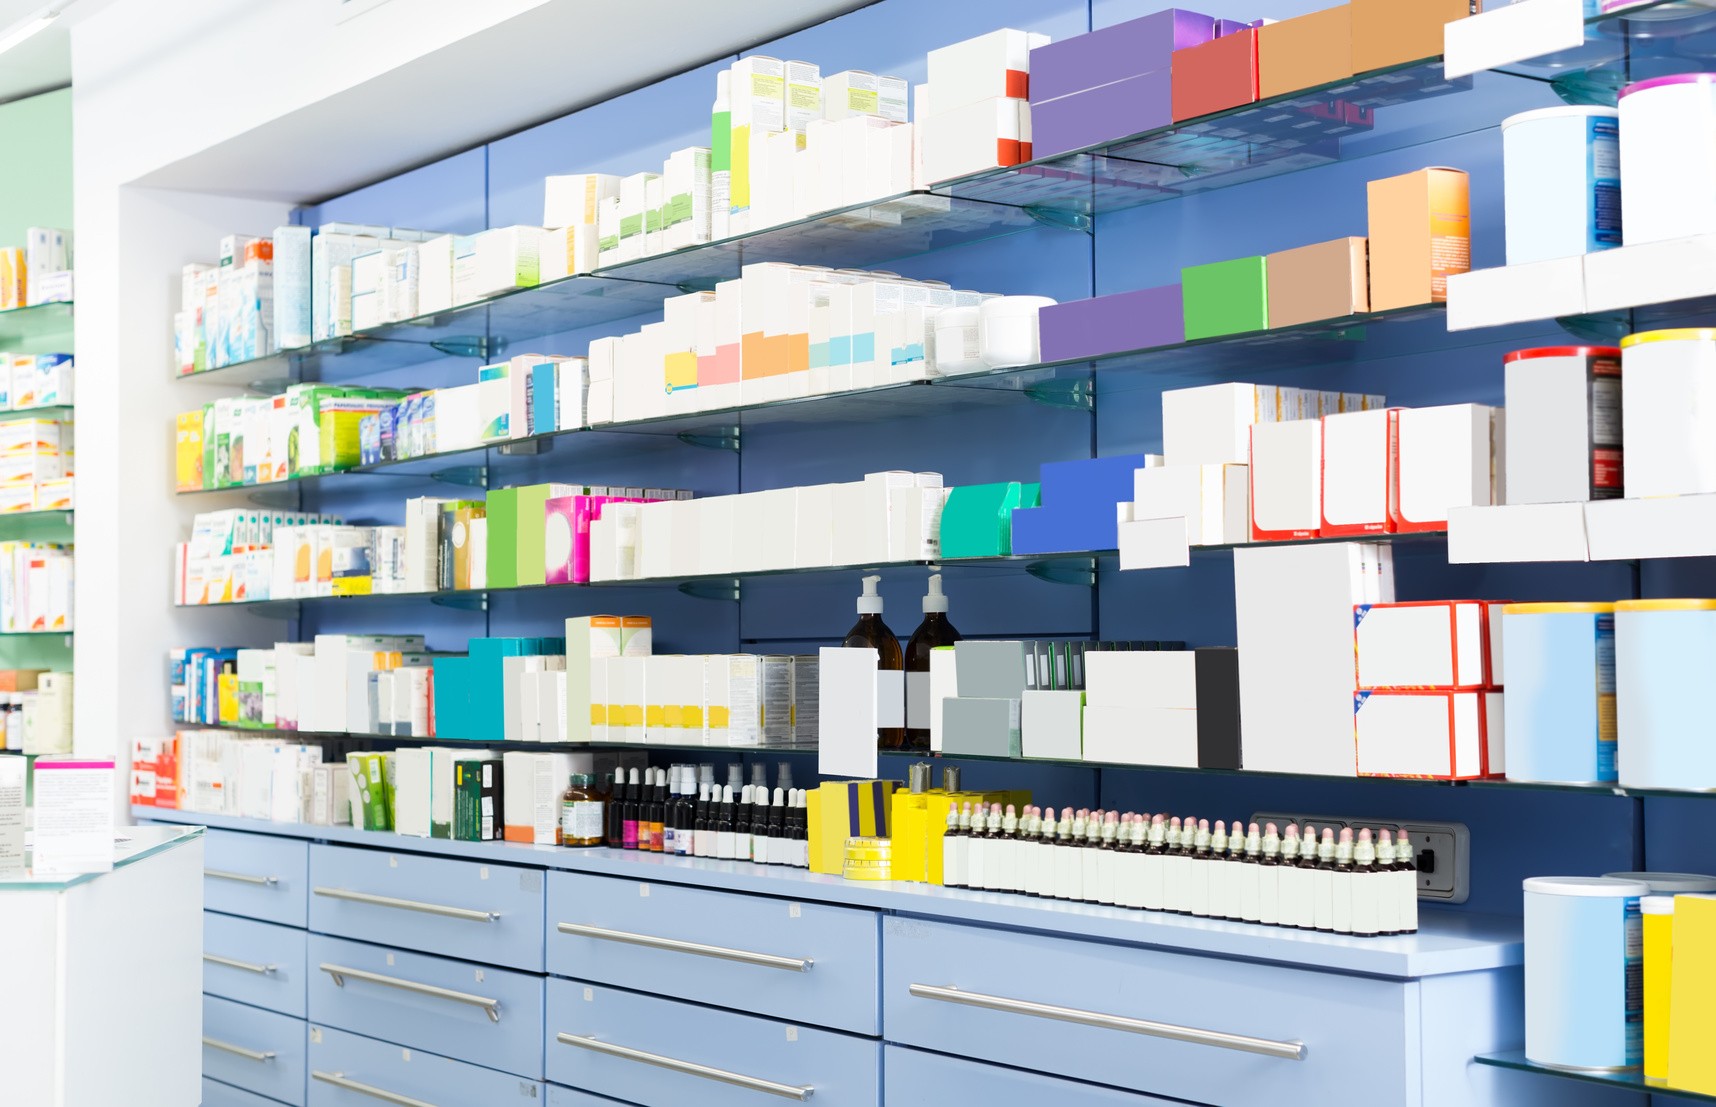 Image of the shelves with medicines